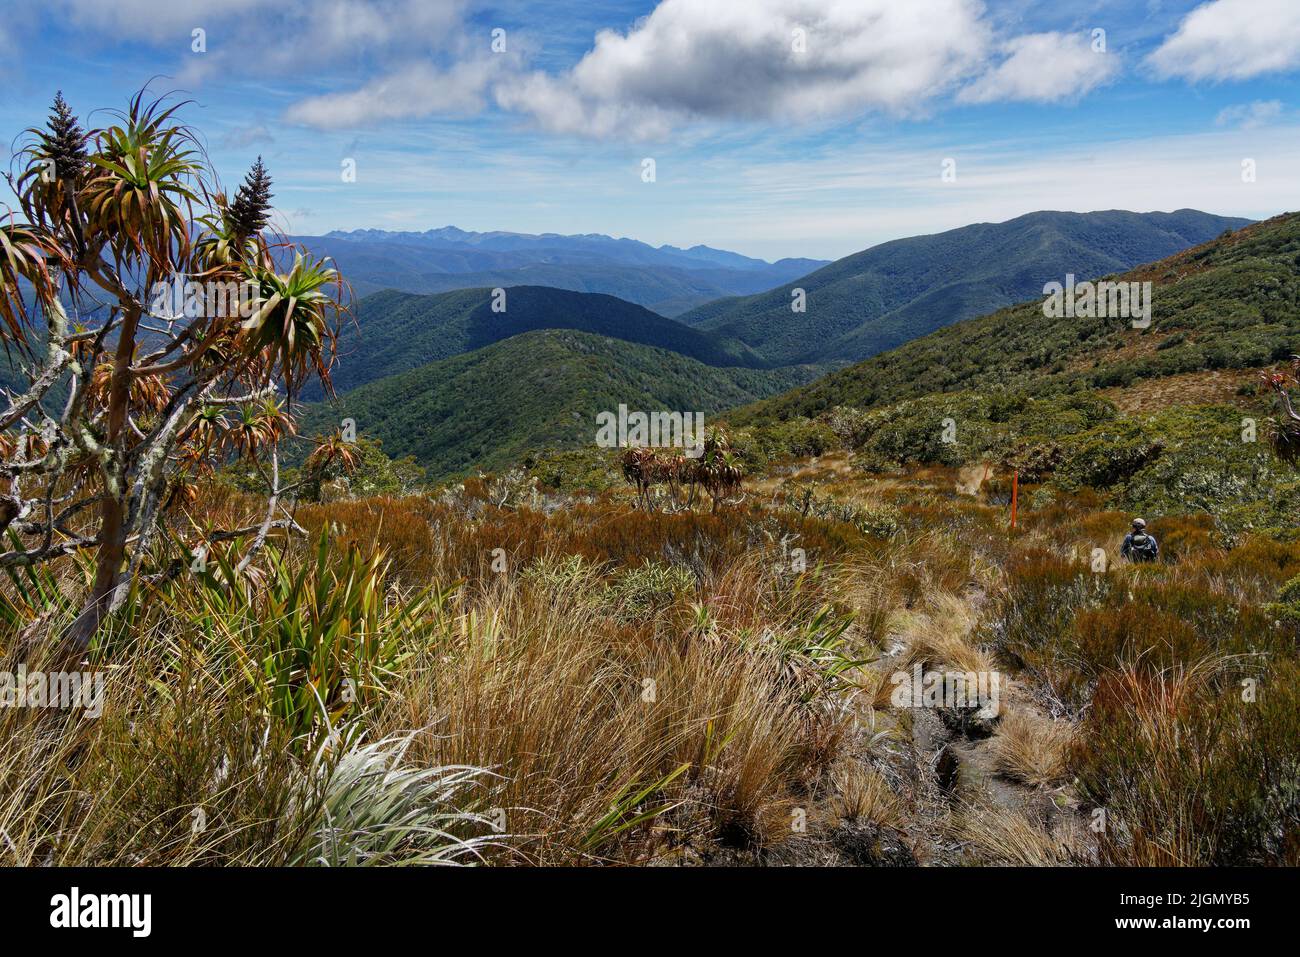 A hiker or tramper following a poled route, a Dracophyllum tree in the foreground, Kahurangi National Park, Tasman region, south island, Aotearoa / Ne Stock Photo